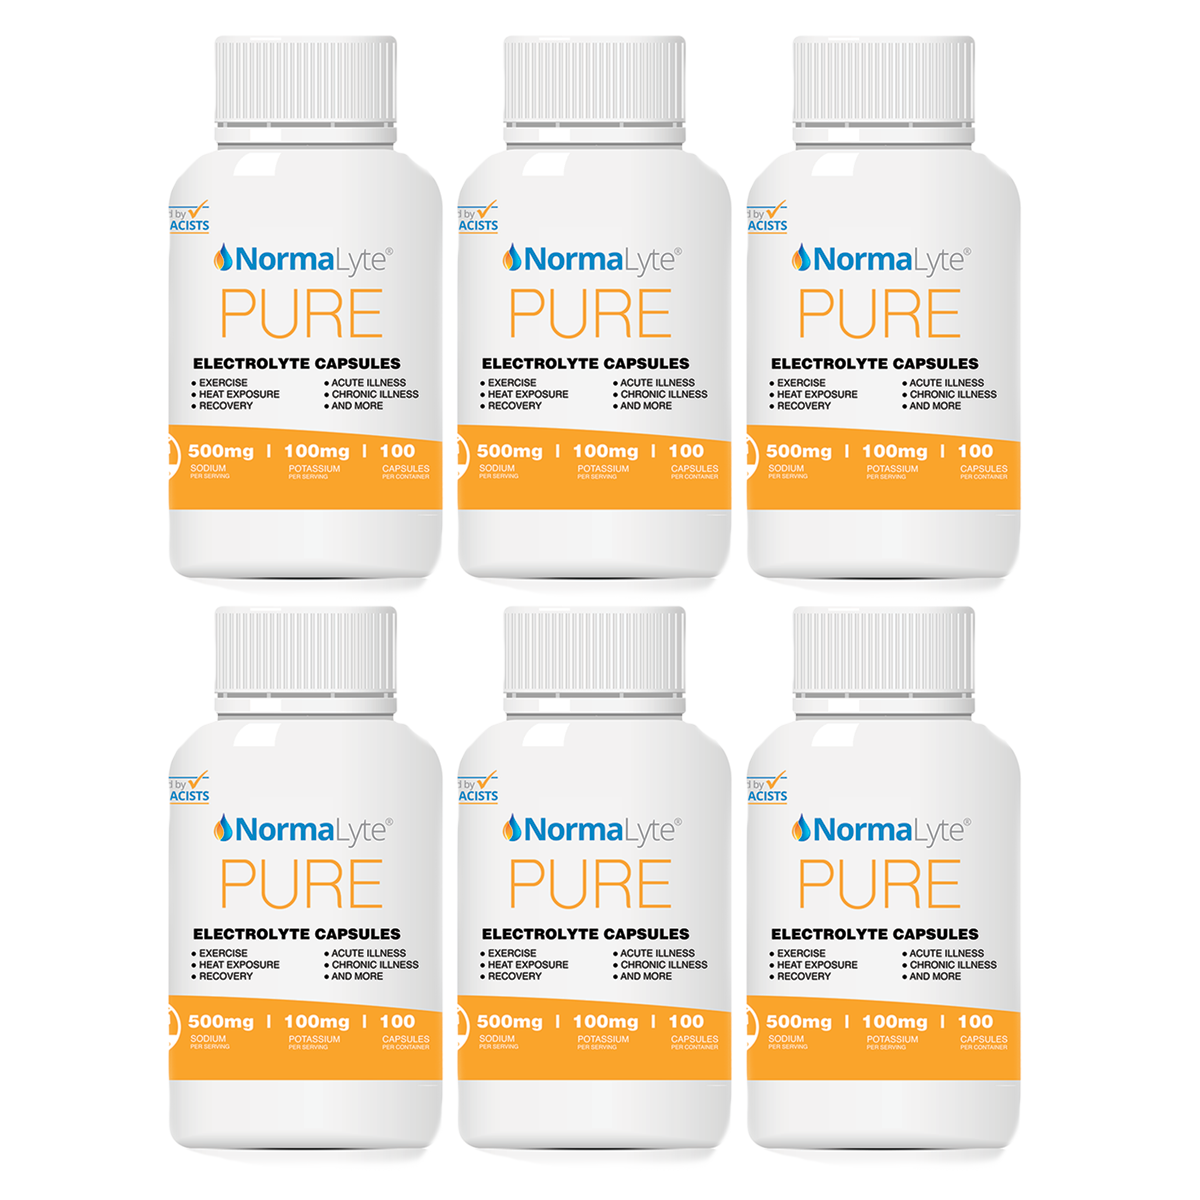 NormaLyte PURE Electrolyte Salt Capsules - 100 Count Bottle